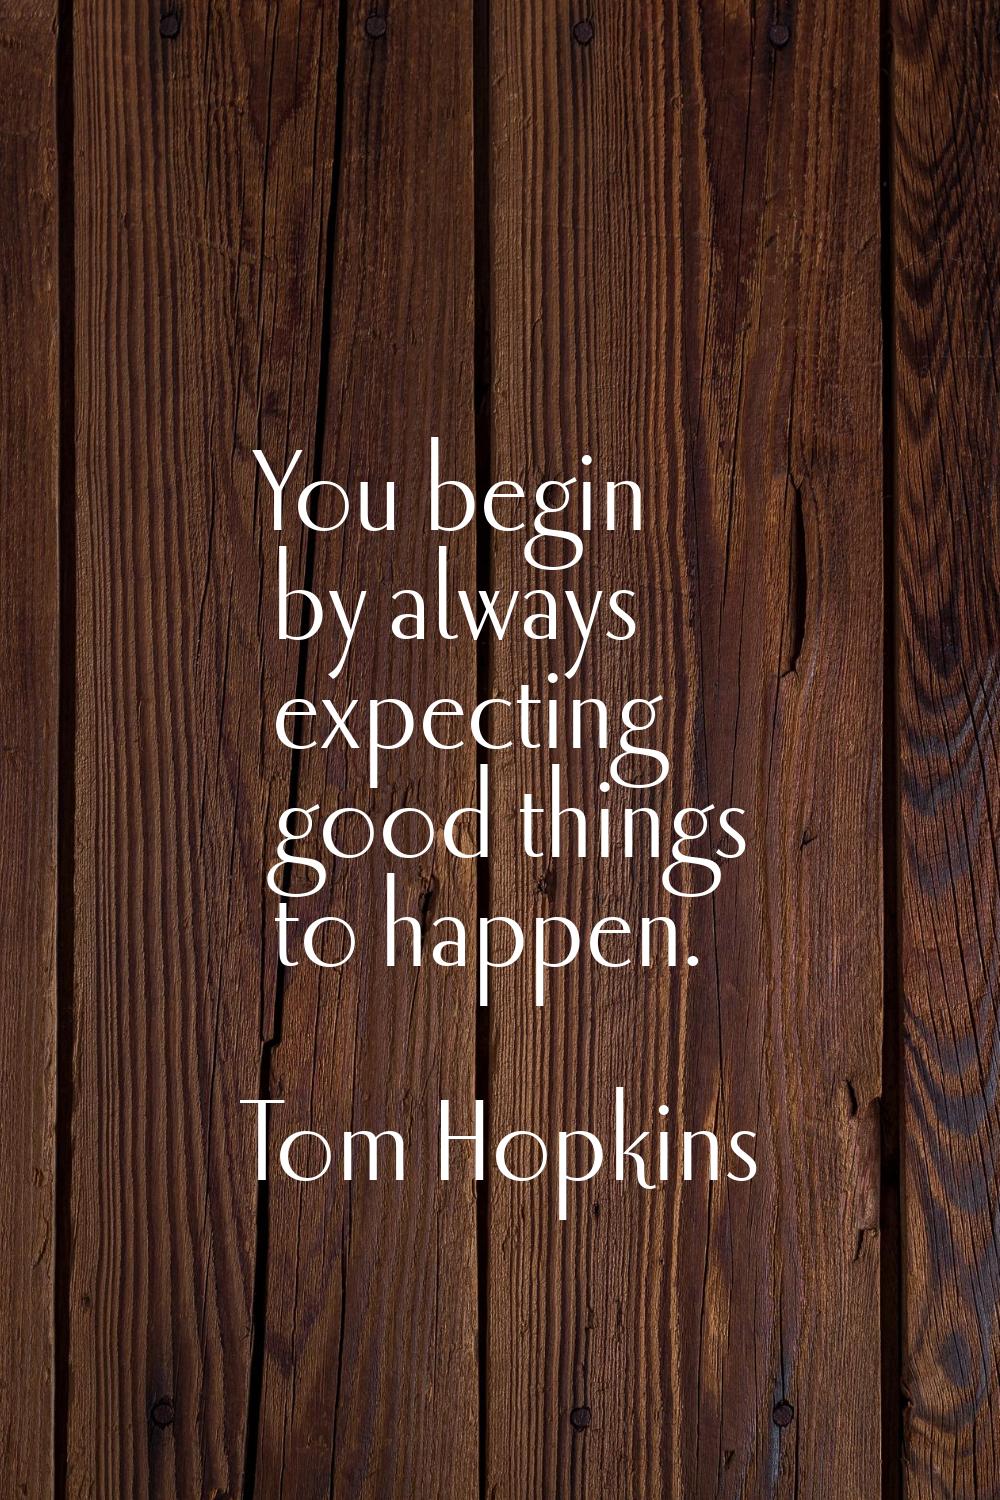 You begin by always expecting good things to happen.